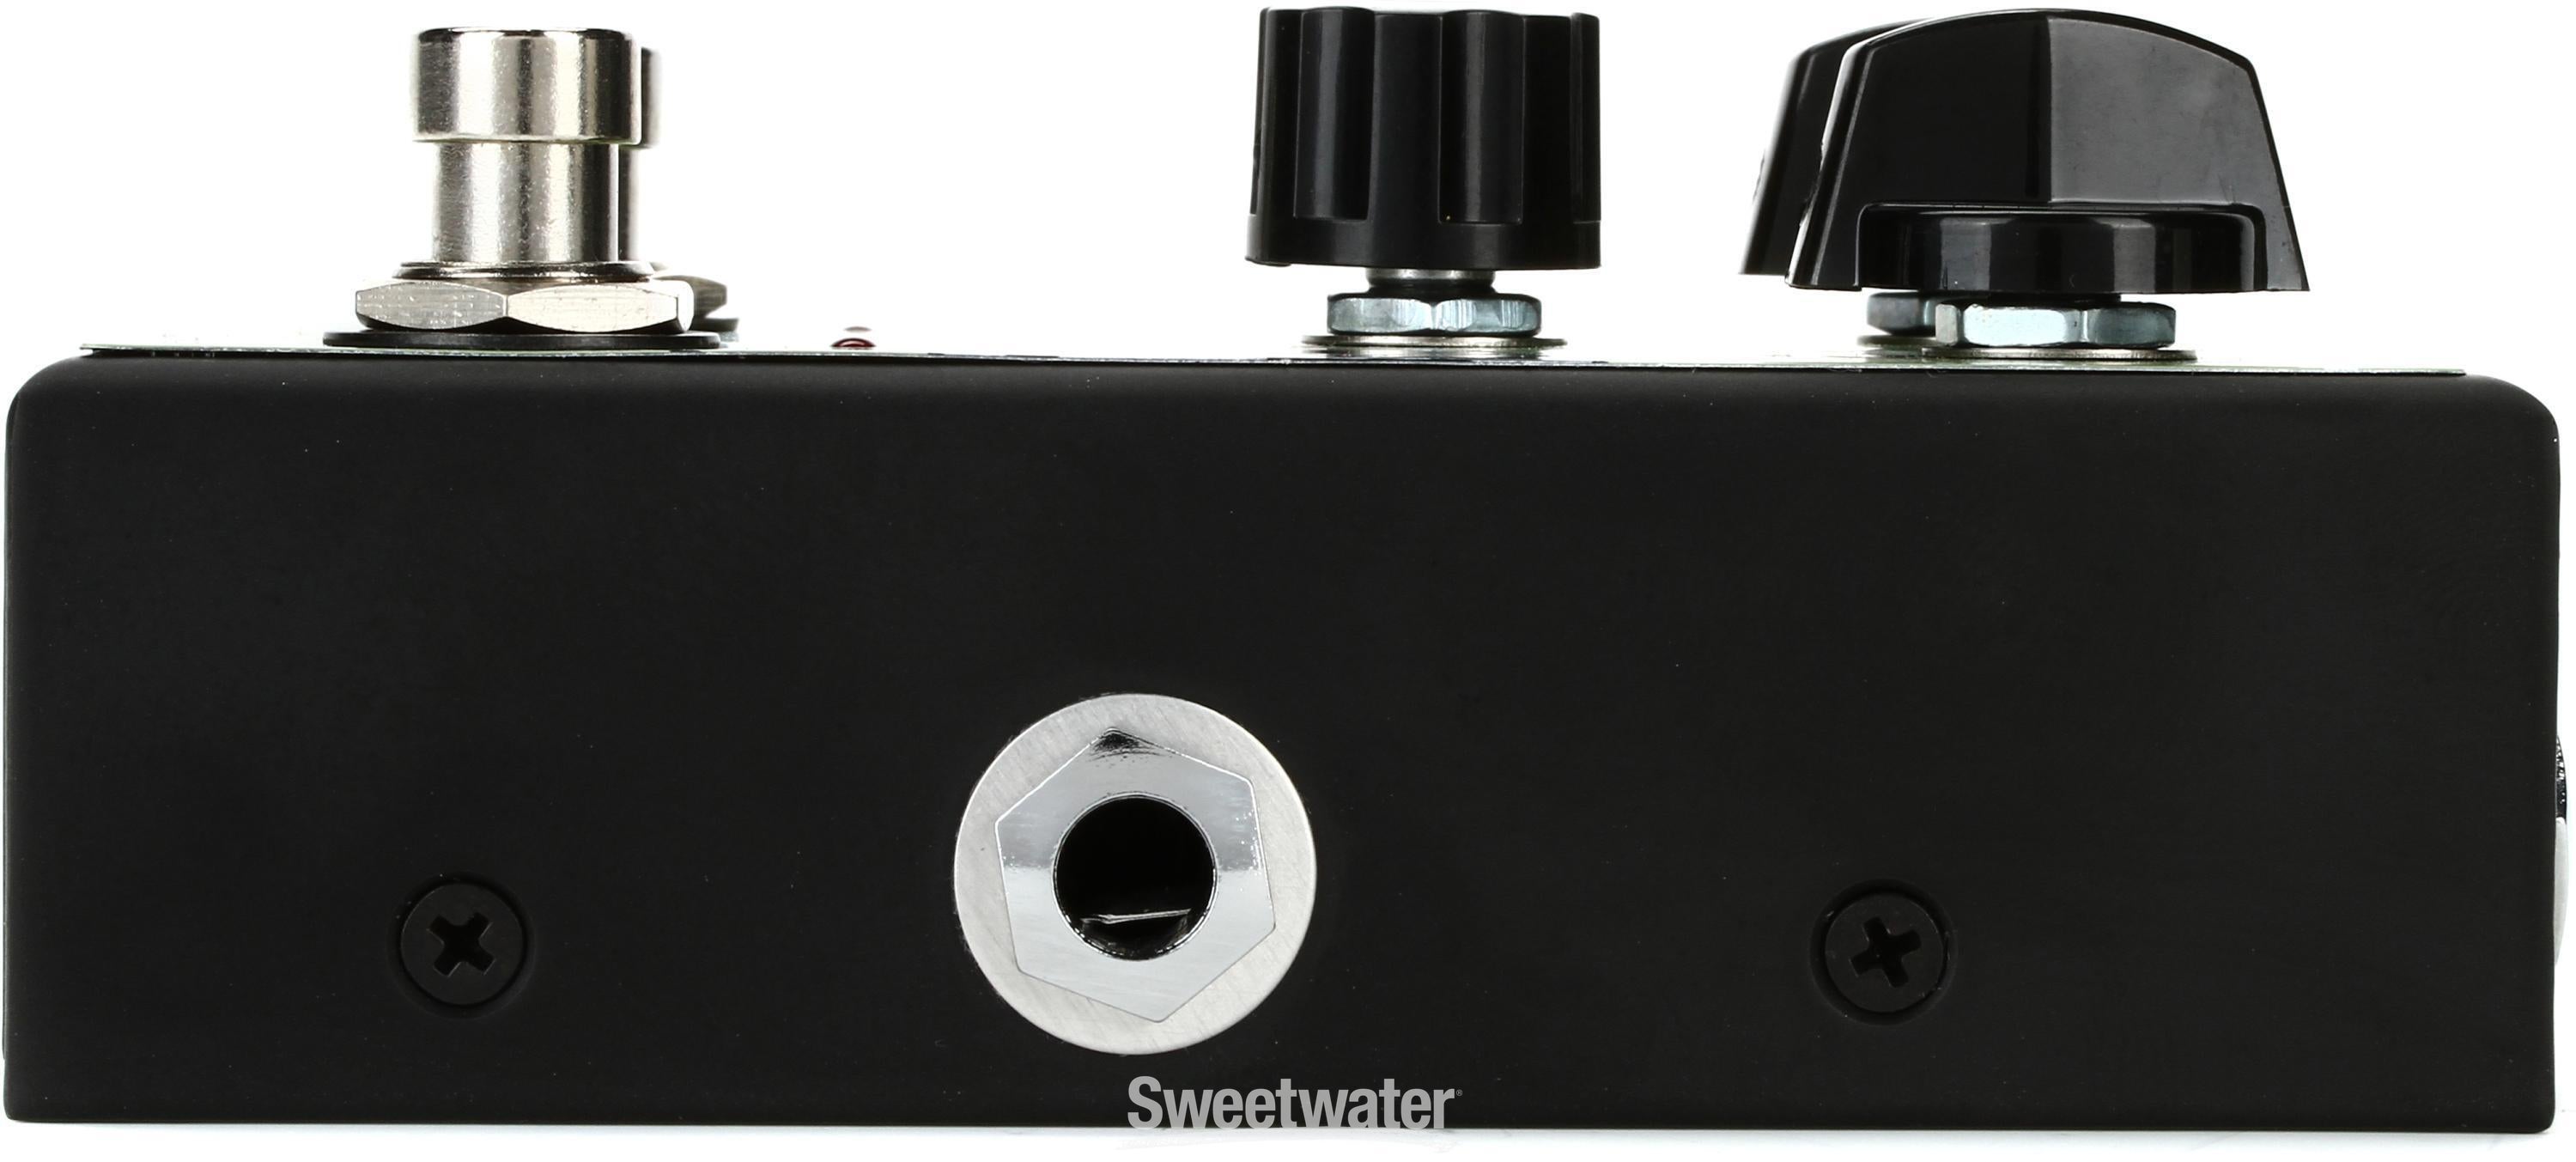 J. Rockett Audio Designs APE Analog Preamp Experiment Pedal | Sweetwater